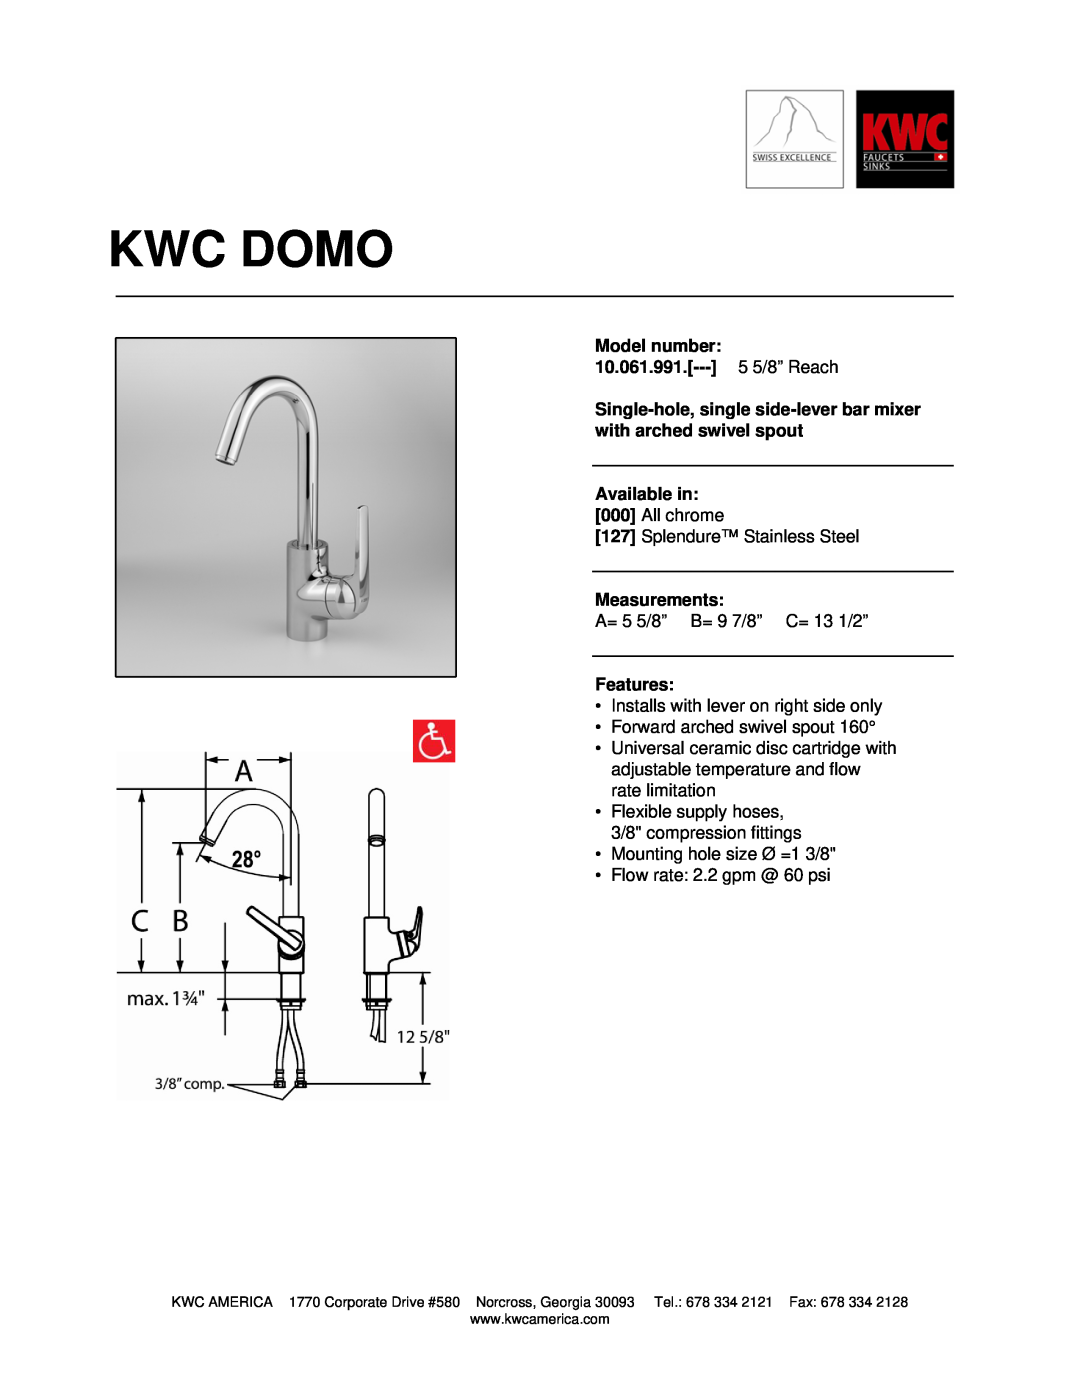 KWC manual Kwc Domo, Model number 10.061.991.--- 5 5/8” Reach, Available in, Measurements, Features 